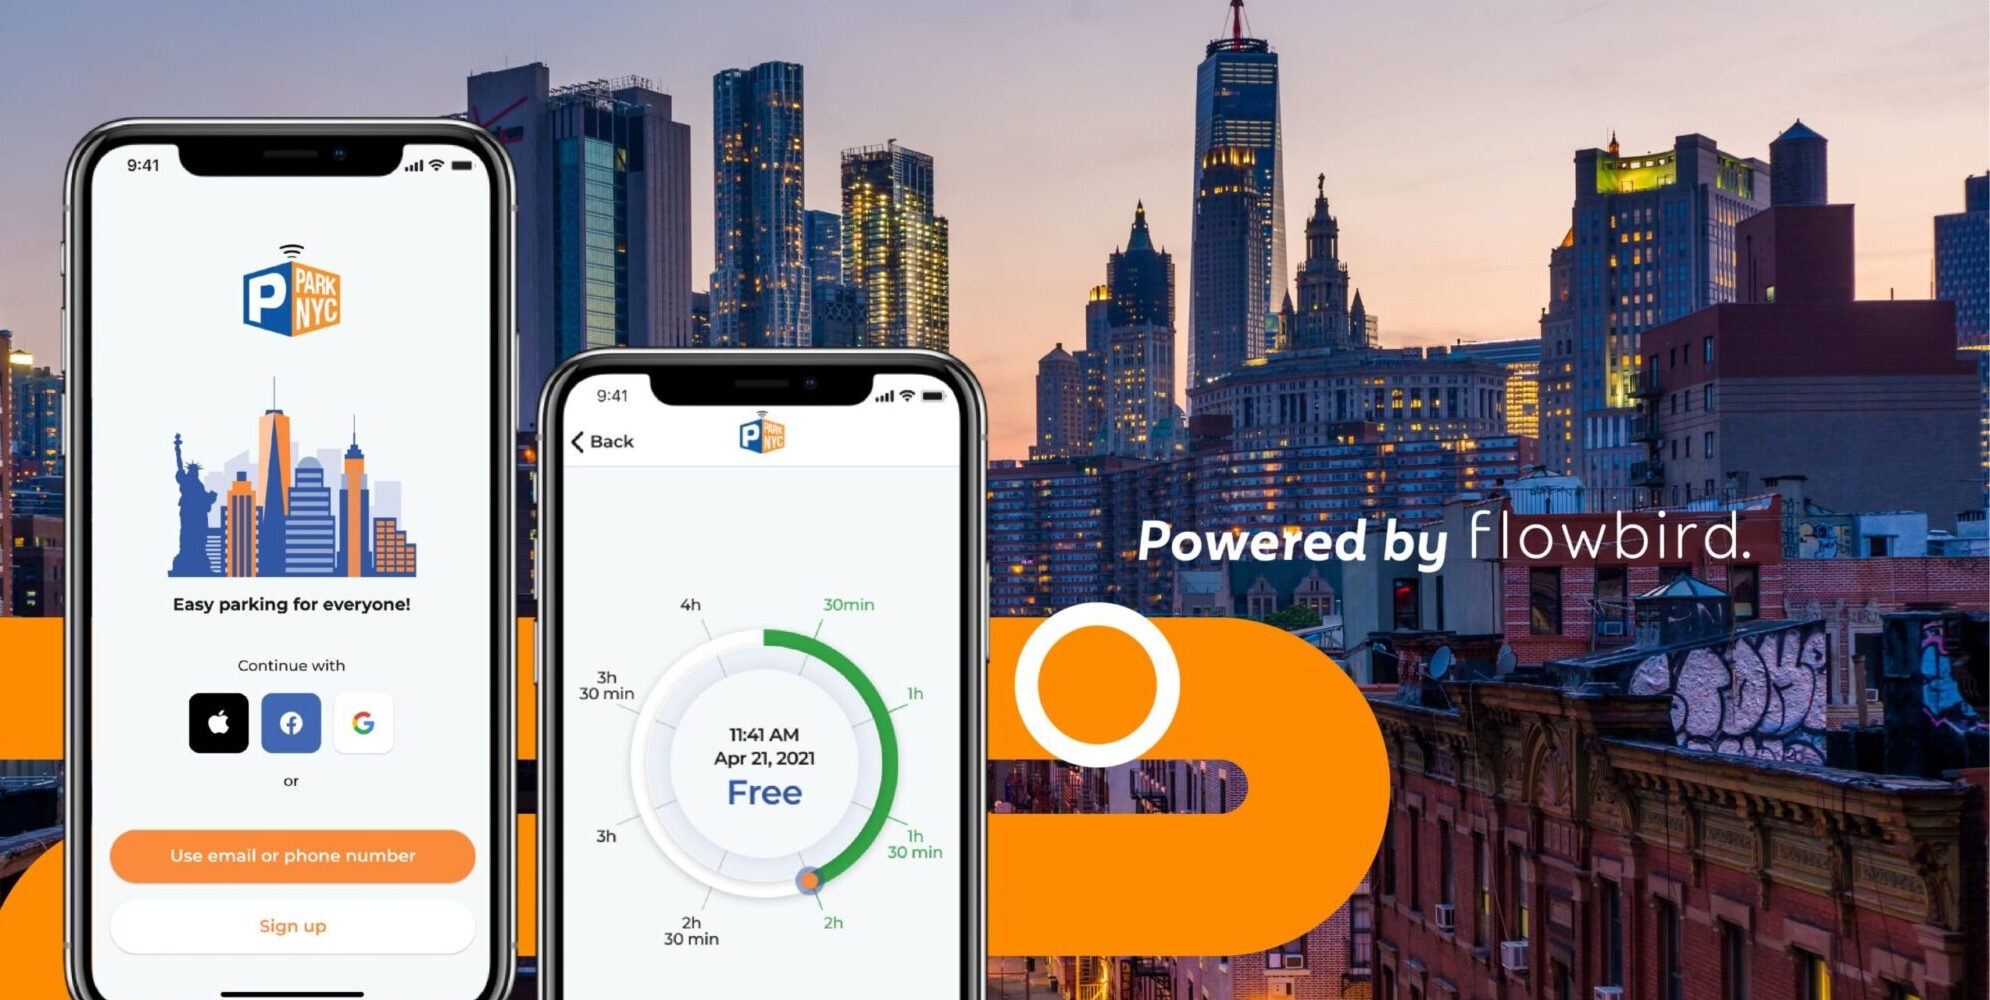 ParkNYC Powered by Flowbird